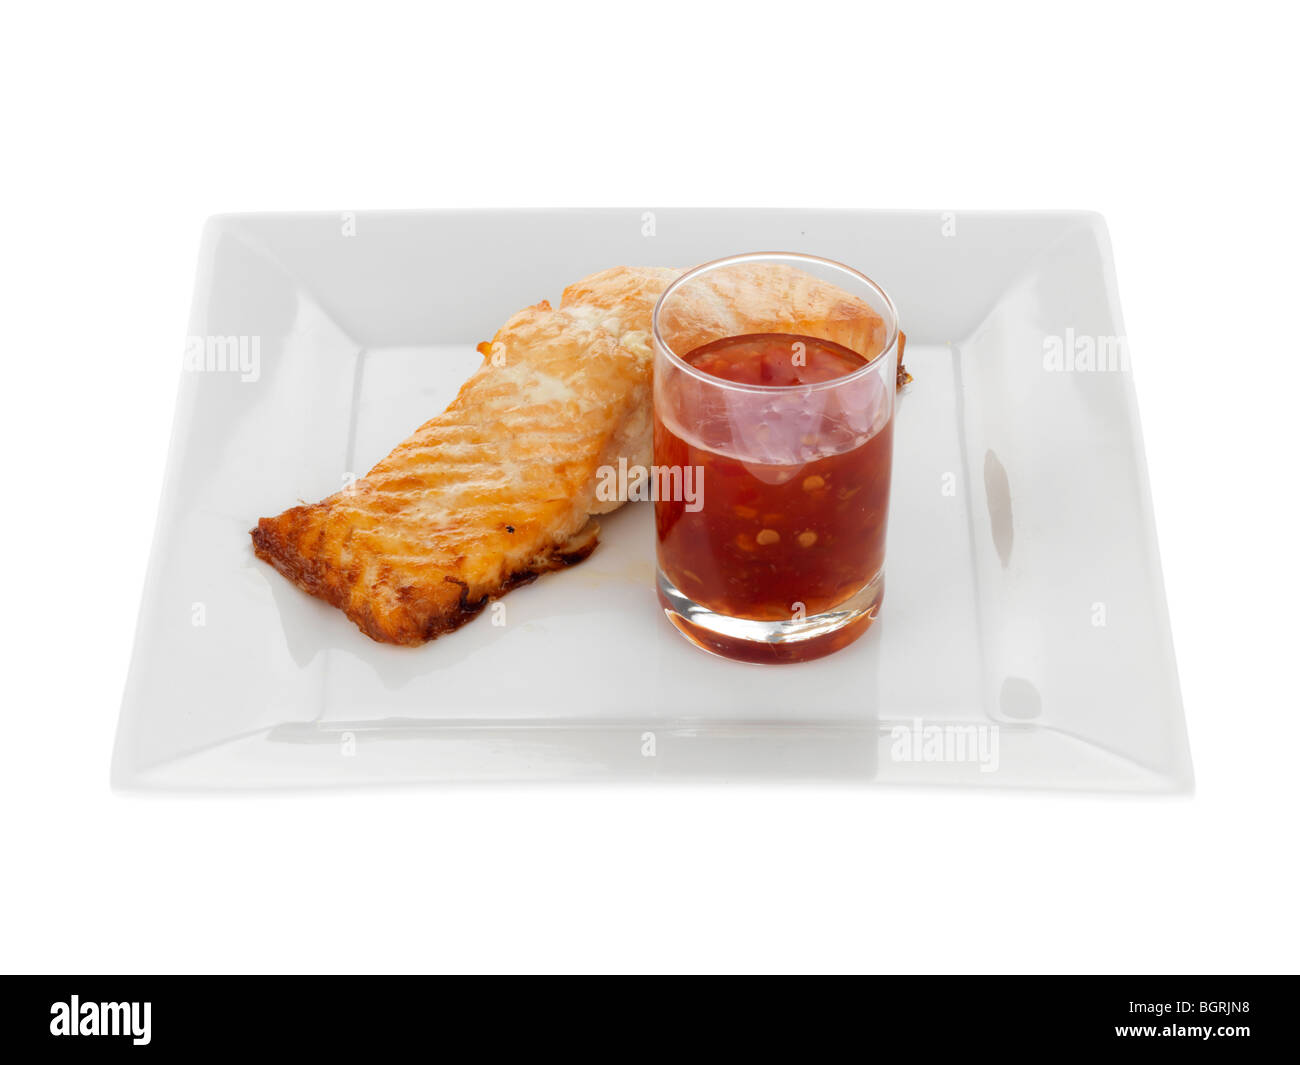 Baked Salmon with Sweet Chilli Sauce Stock Photo